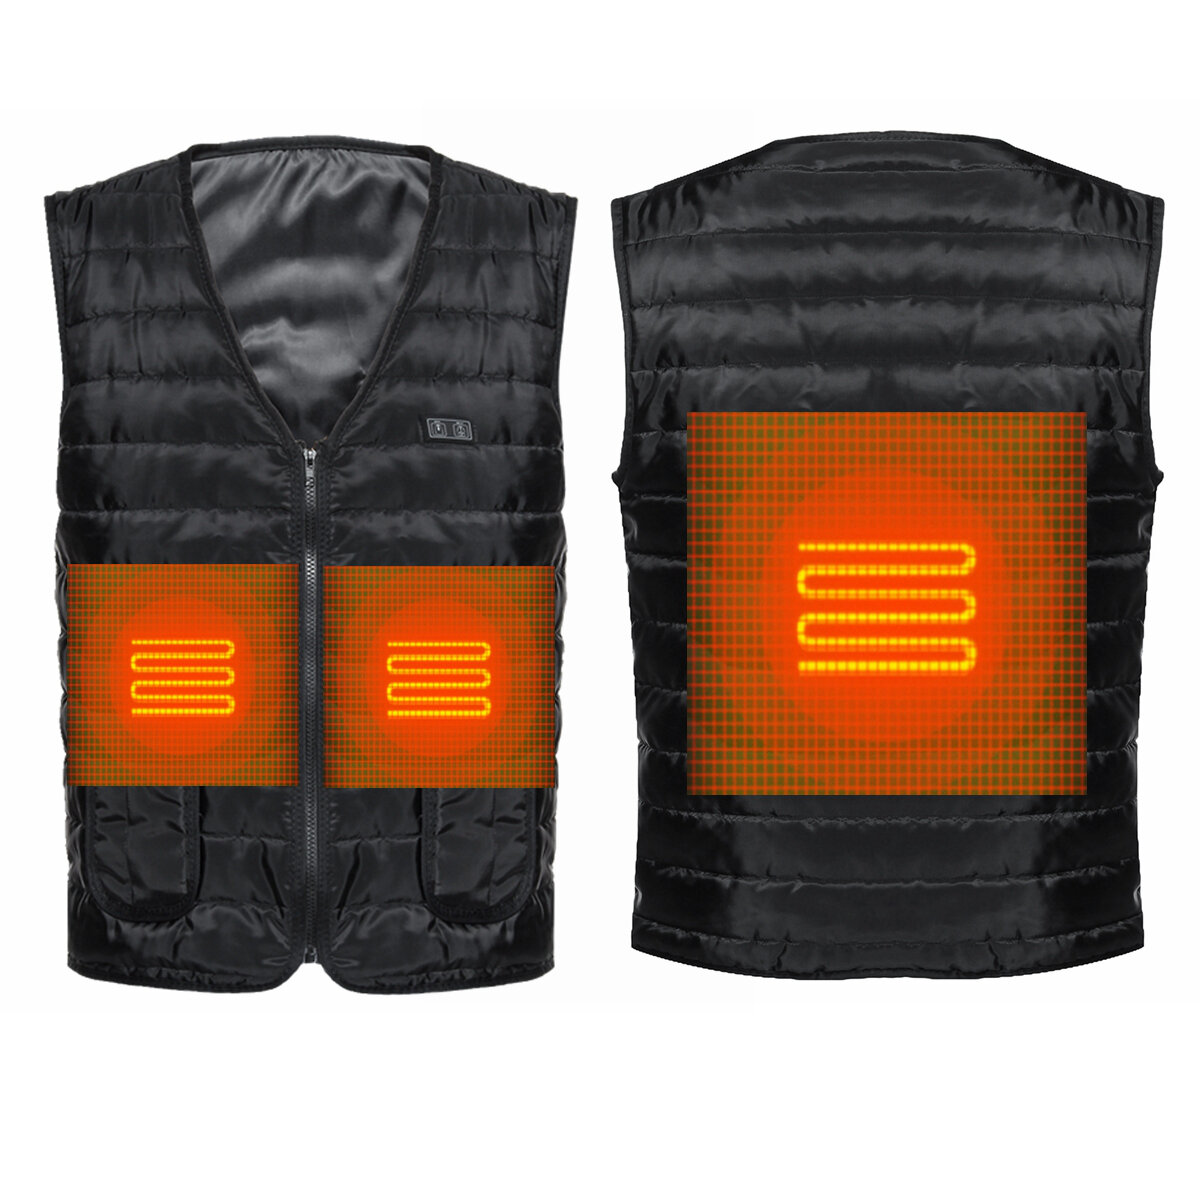 Image of Dual Cotton HeatedElectric 3 Gear USB Vest Men Women 3S Fast Heating Jacket Clothing